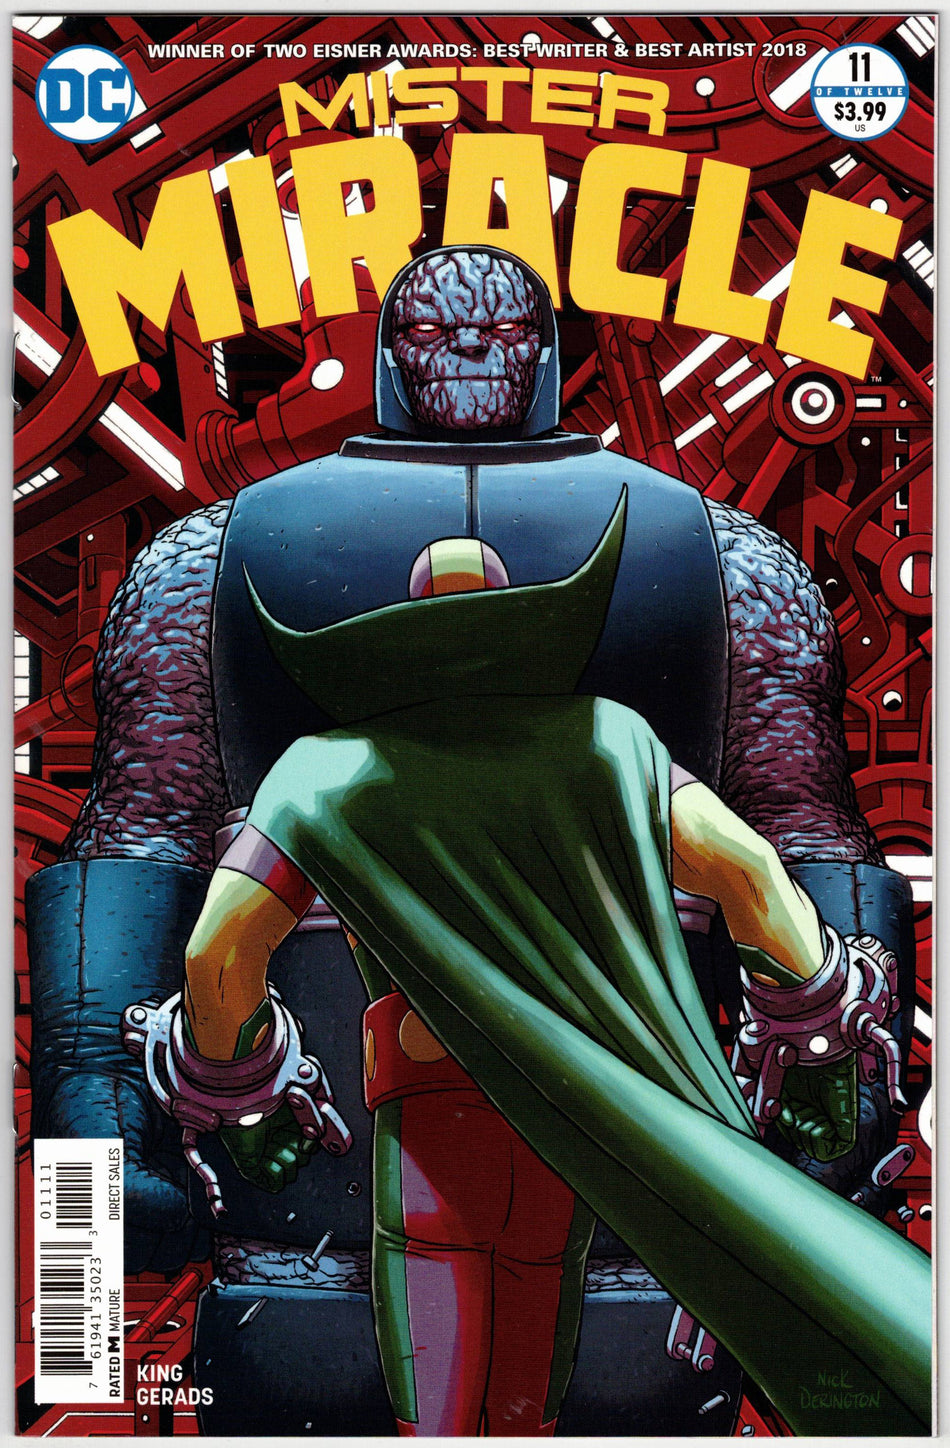 Photo of Mister Miracle, Vol. 4 (2018) Issue 11A - Near Mint Comic sold by Stronghold Collectibles